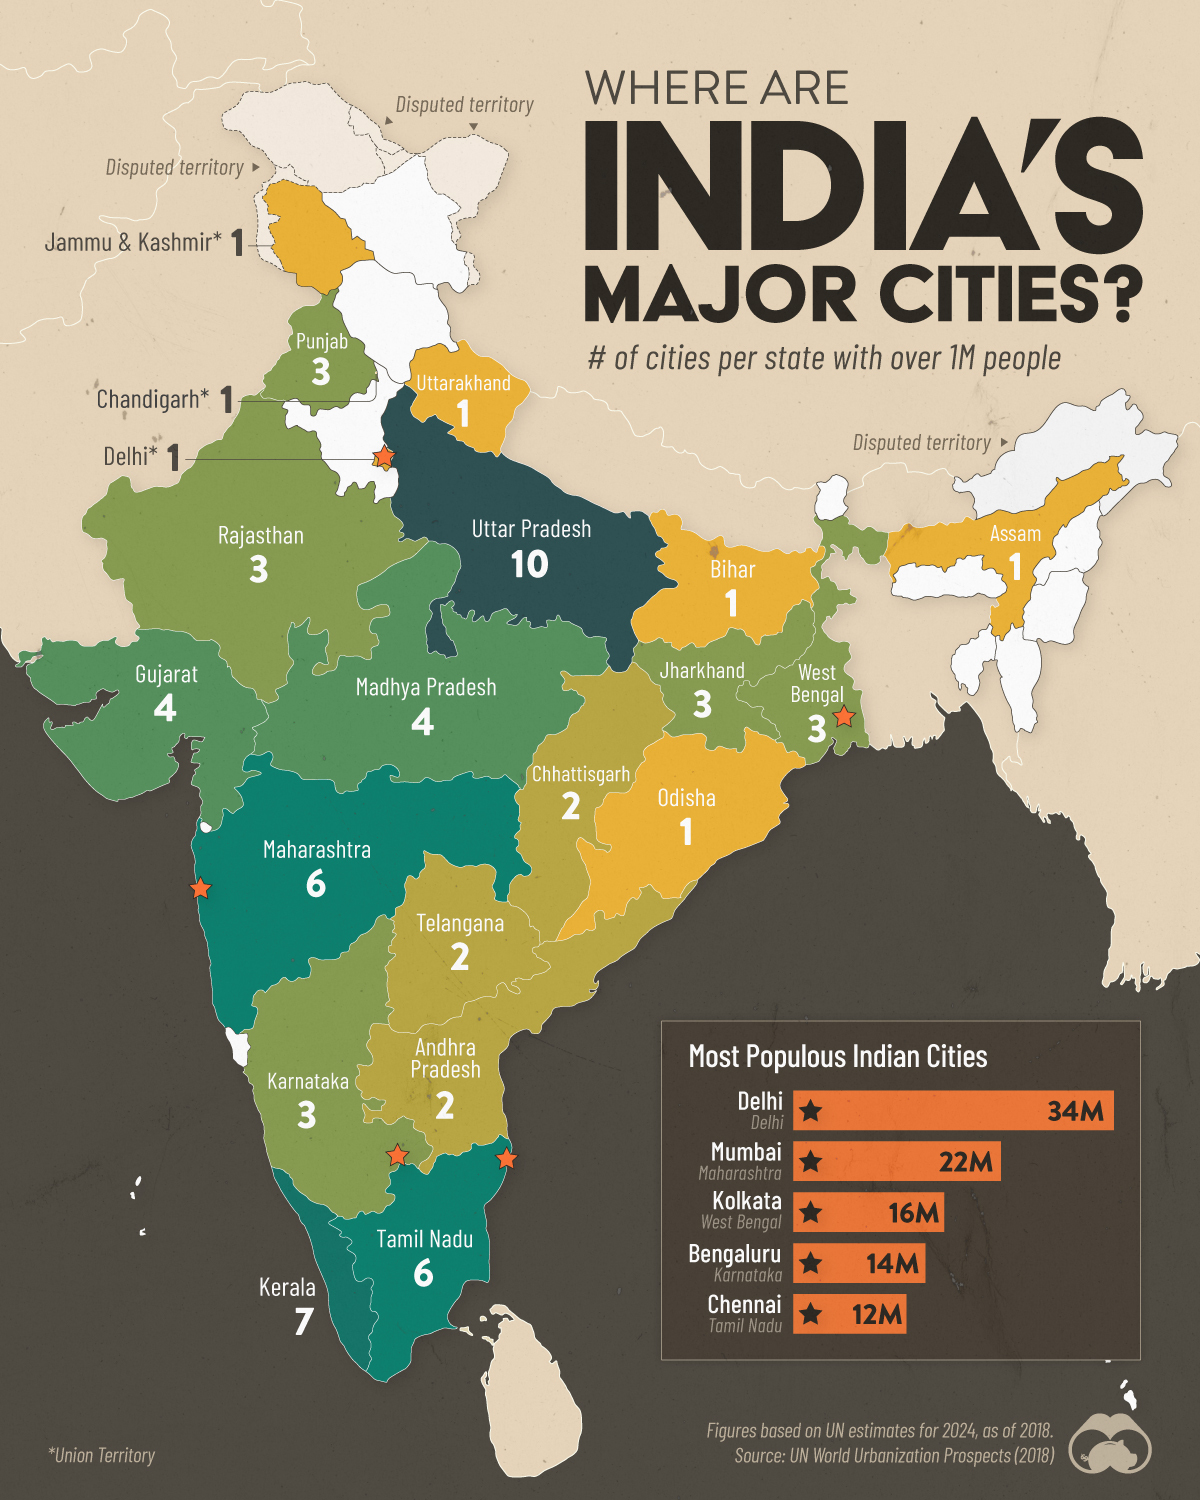 A map of Indian states and the number of 1 million+ cities in them.